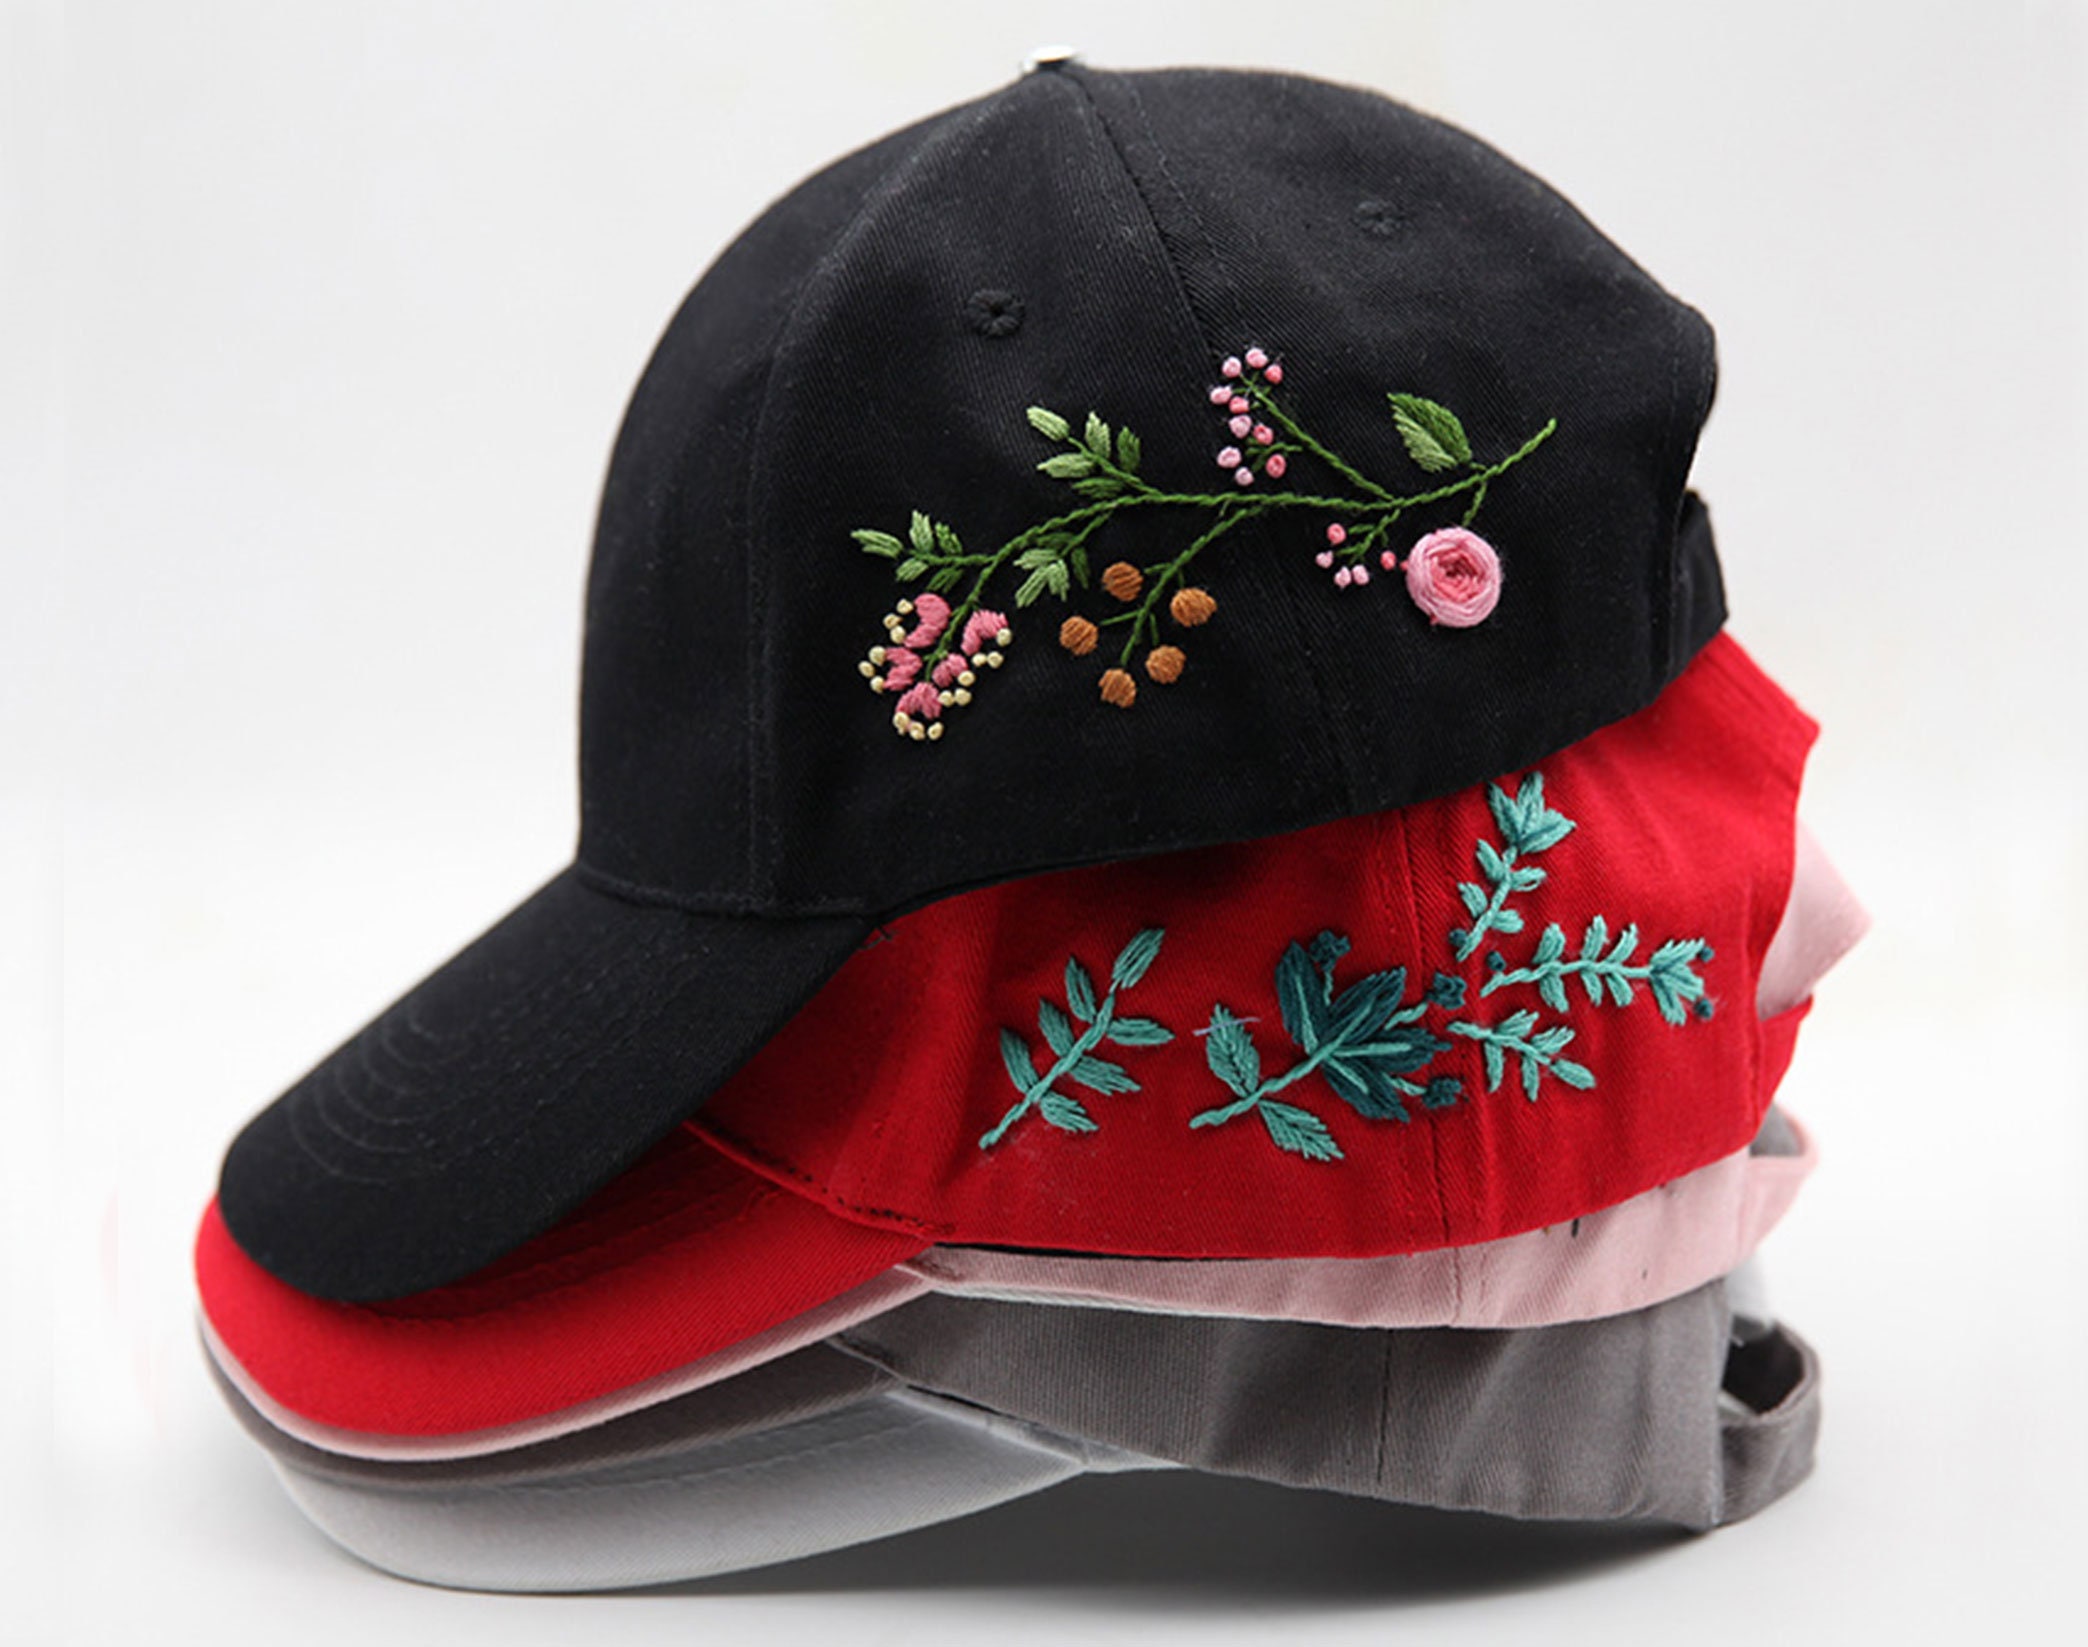 Galleta Horno Grabar Hand Embroidered Flower Baseball Cap Kit or Finished Learn to - Etsy  Singapore